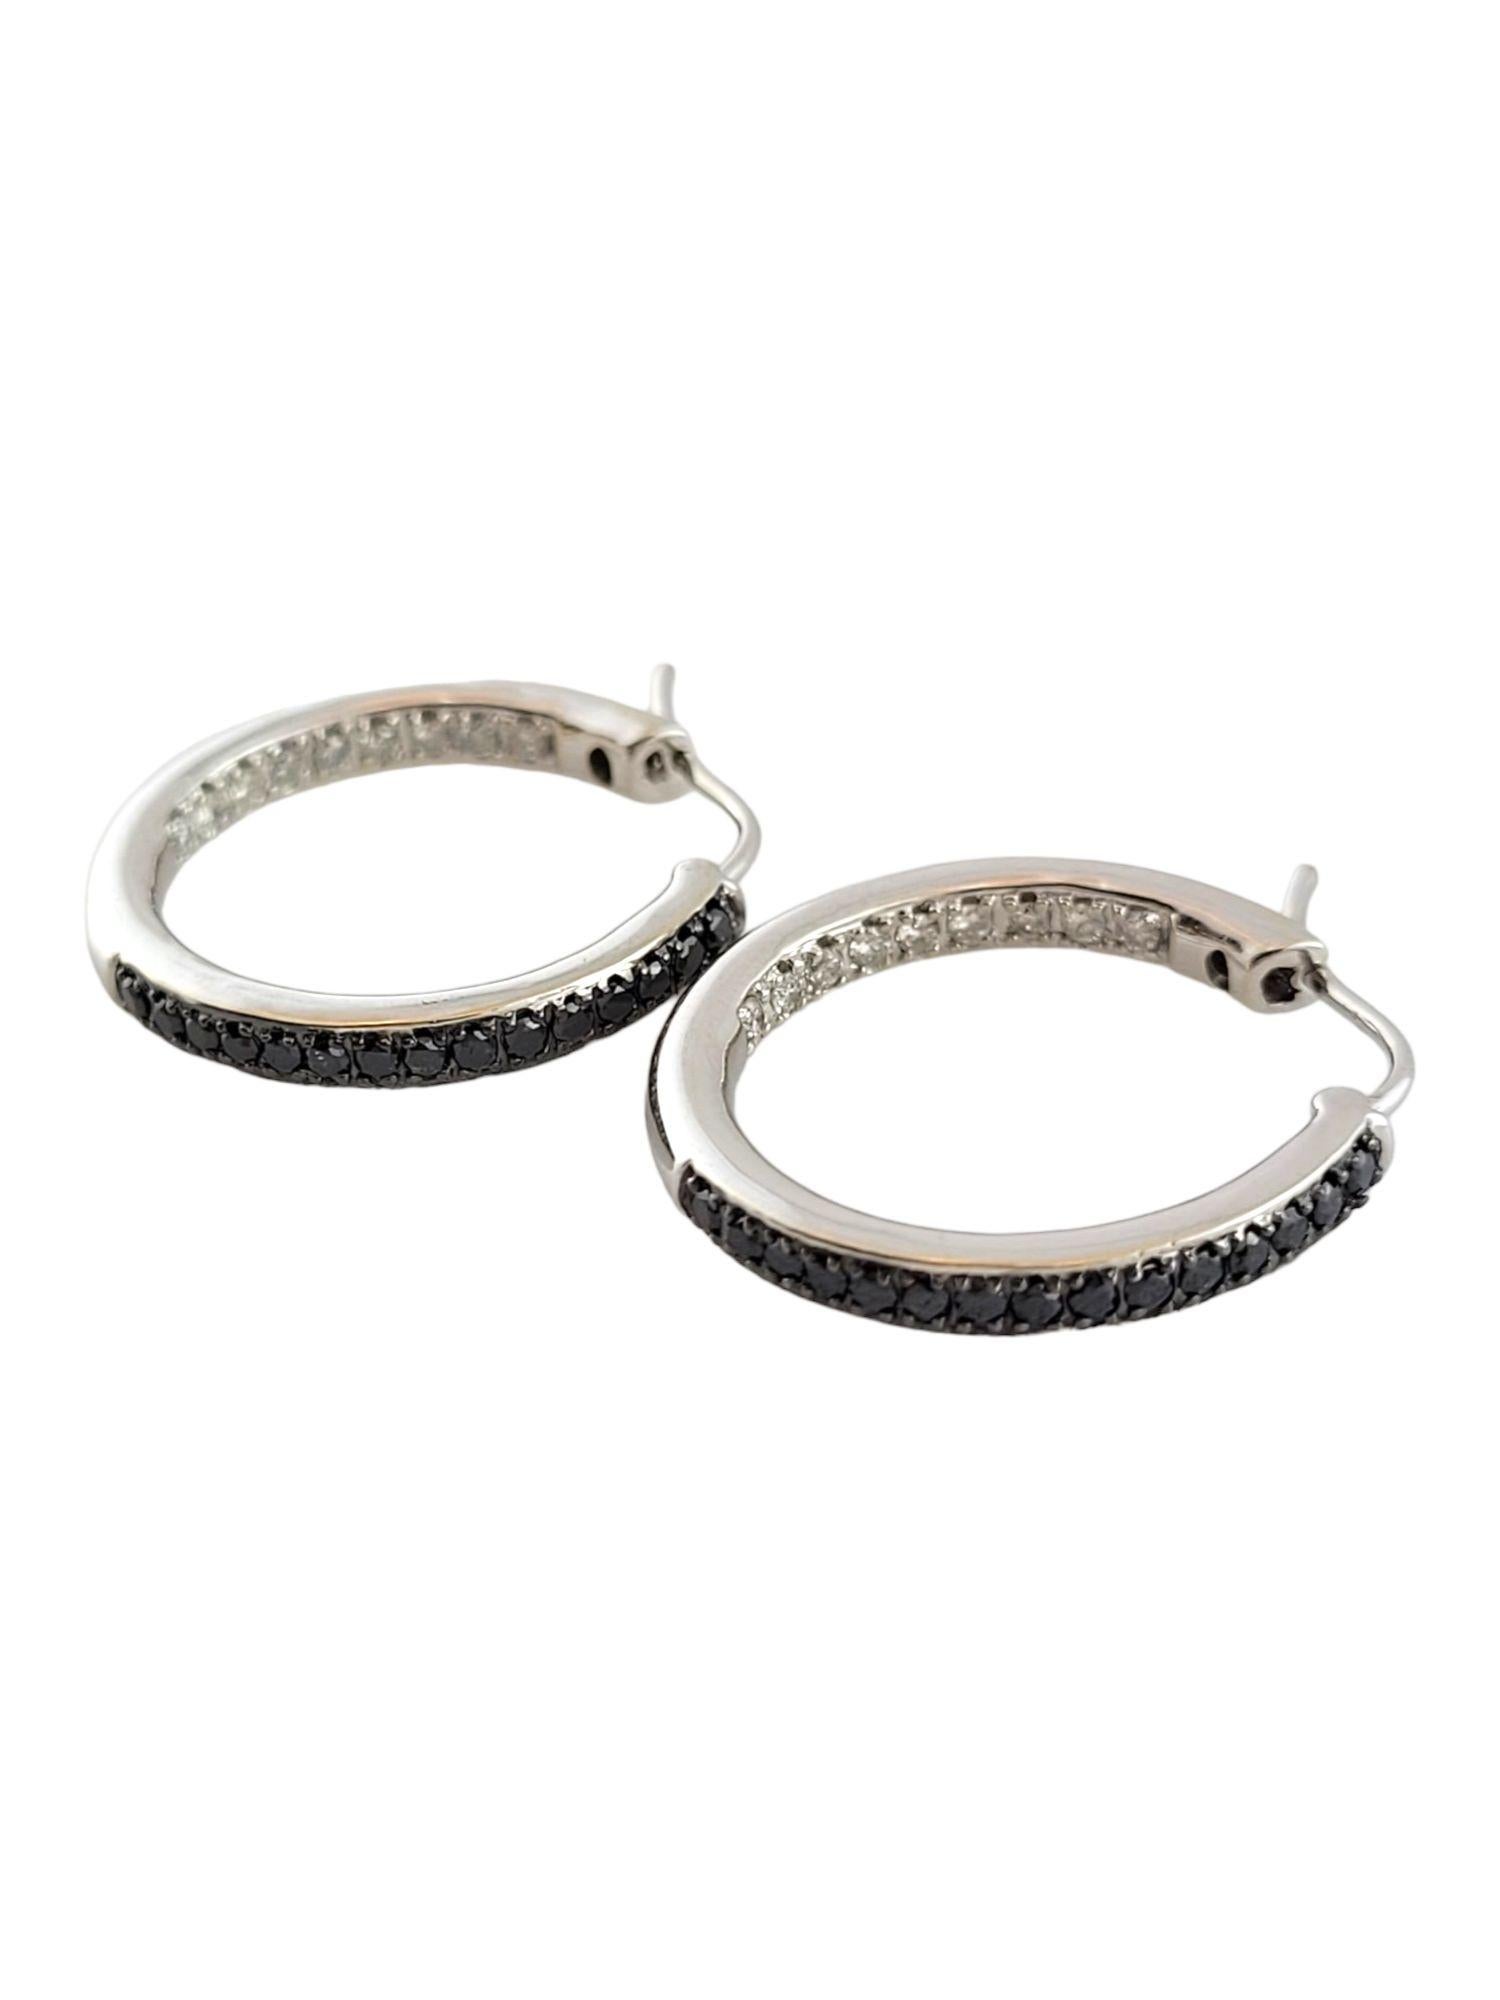 This gorgeous set of white gold hoops has a unique design that features 15 black diamonds on the outside and 9 white, round cut diamonds on the inside of each earring. (30 Back diamonds total) (18 white diamonds total)

Approximate total diamond